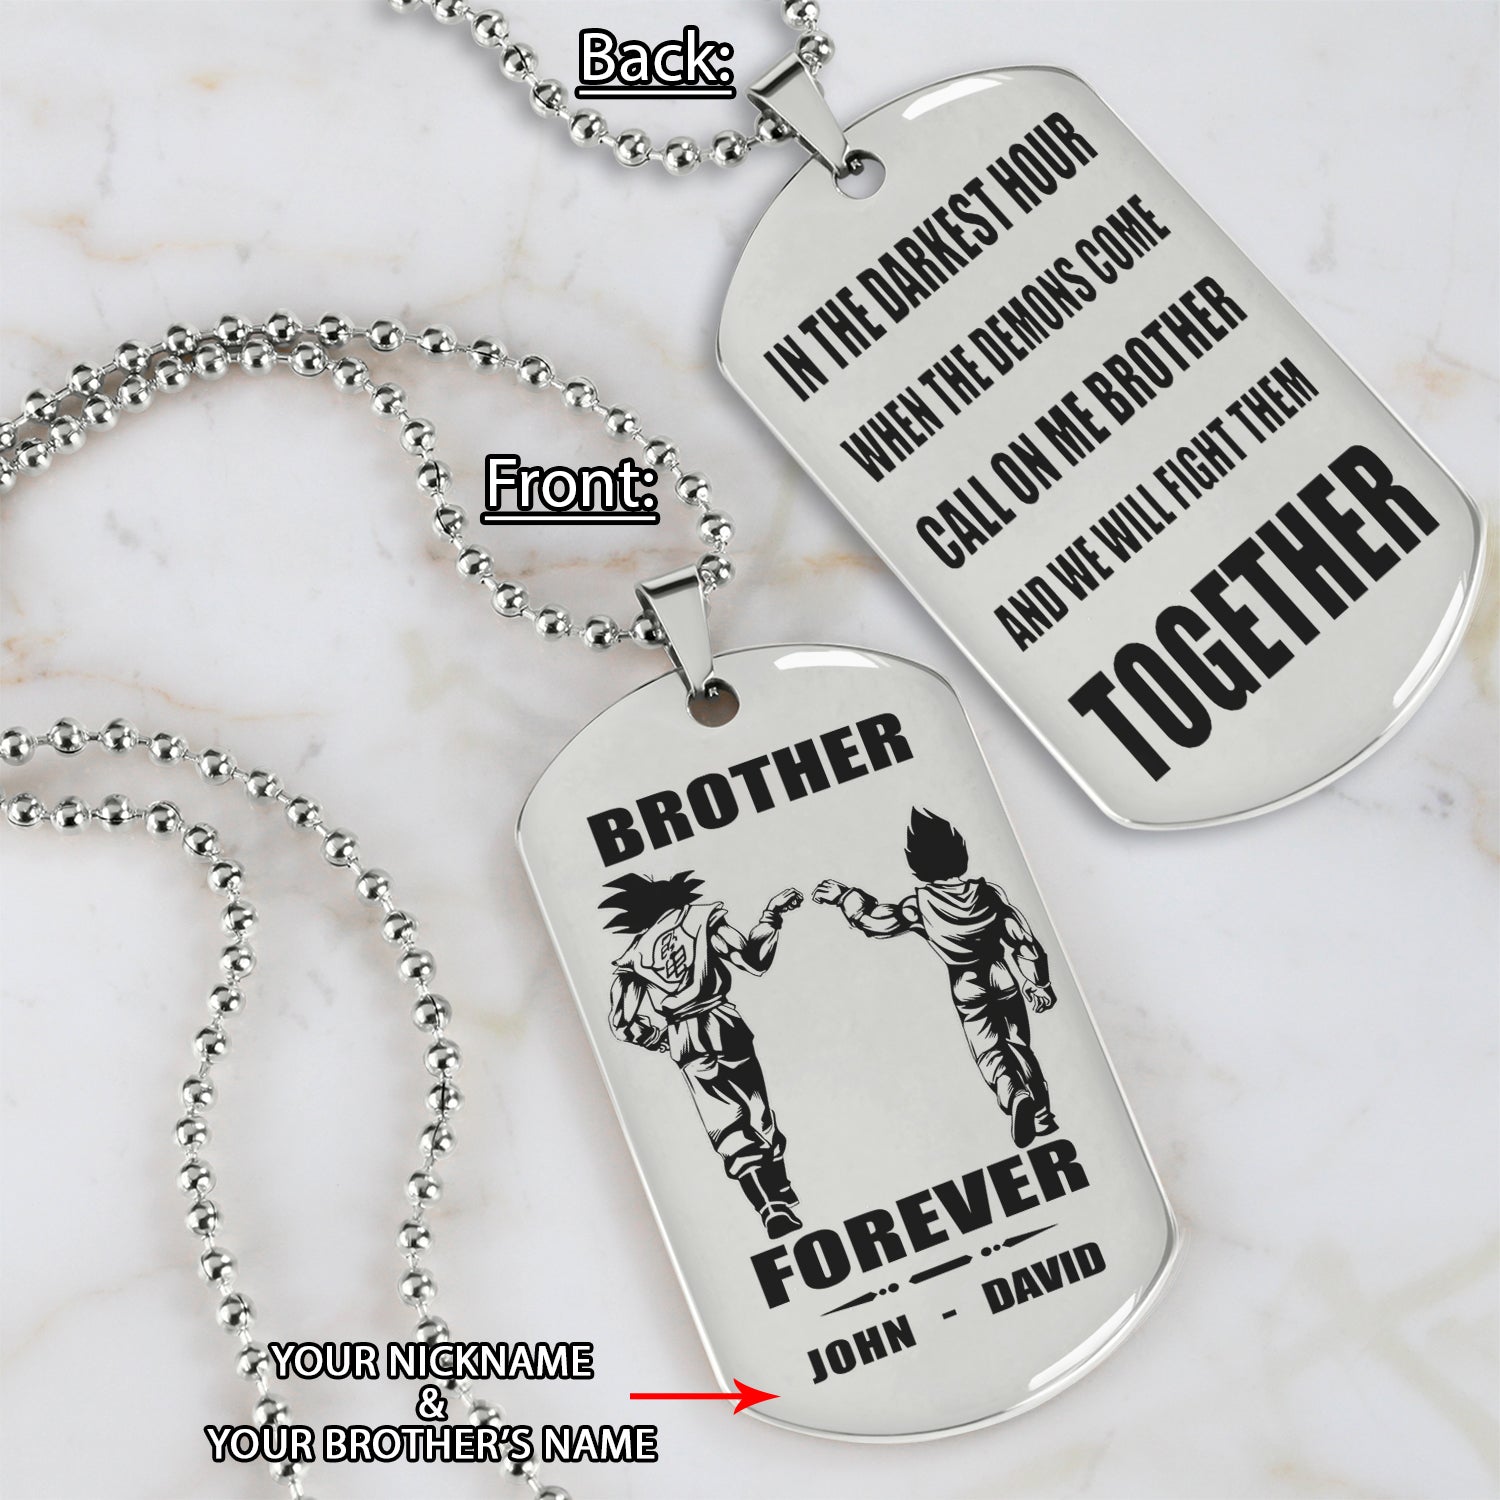 Customizable engraved silver dog tag double sided gift from brother, In the darkest hour, When the demons come call on me brother and we will fight them together, brother forever